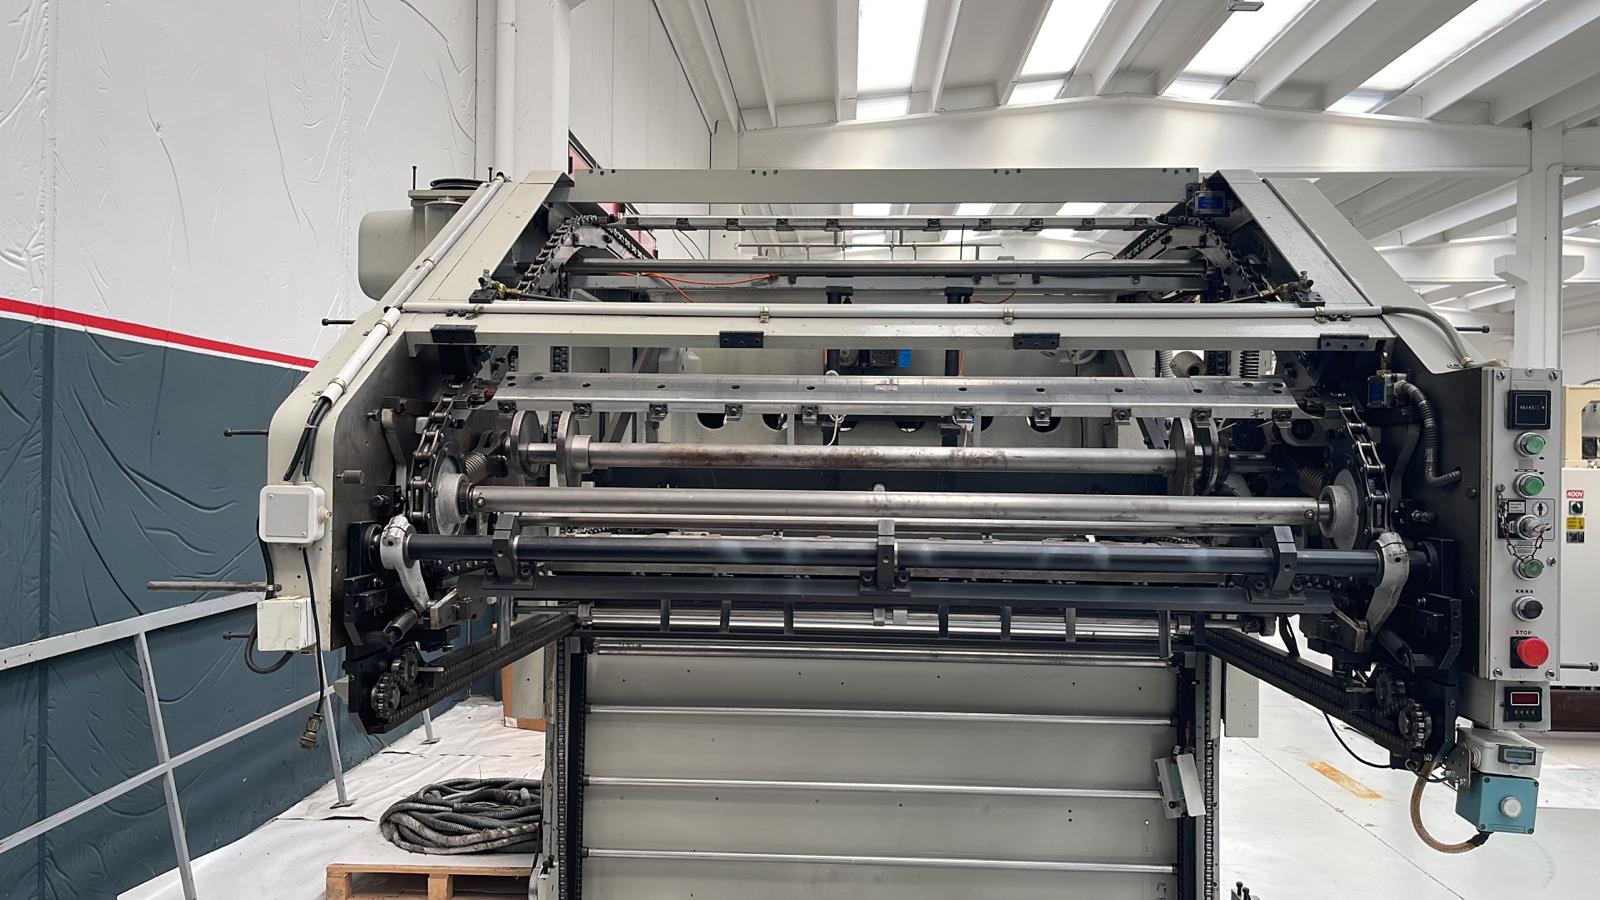 Bobst SP 1420 E Year 1974 Size 